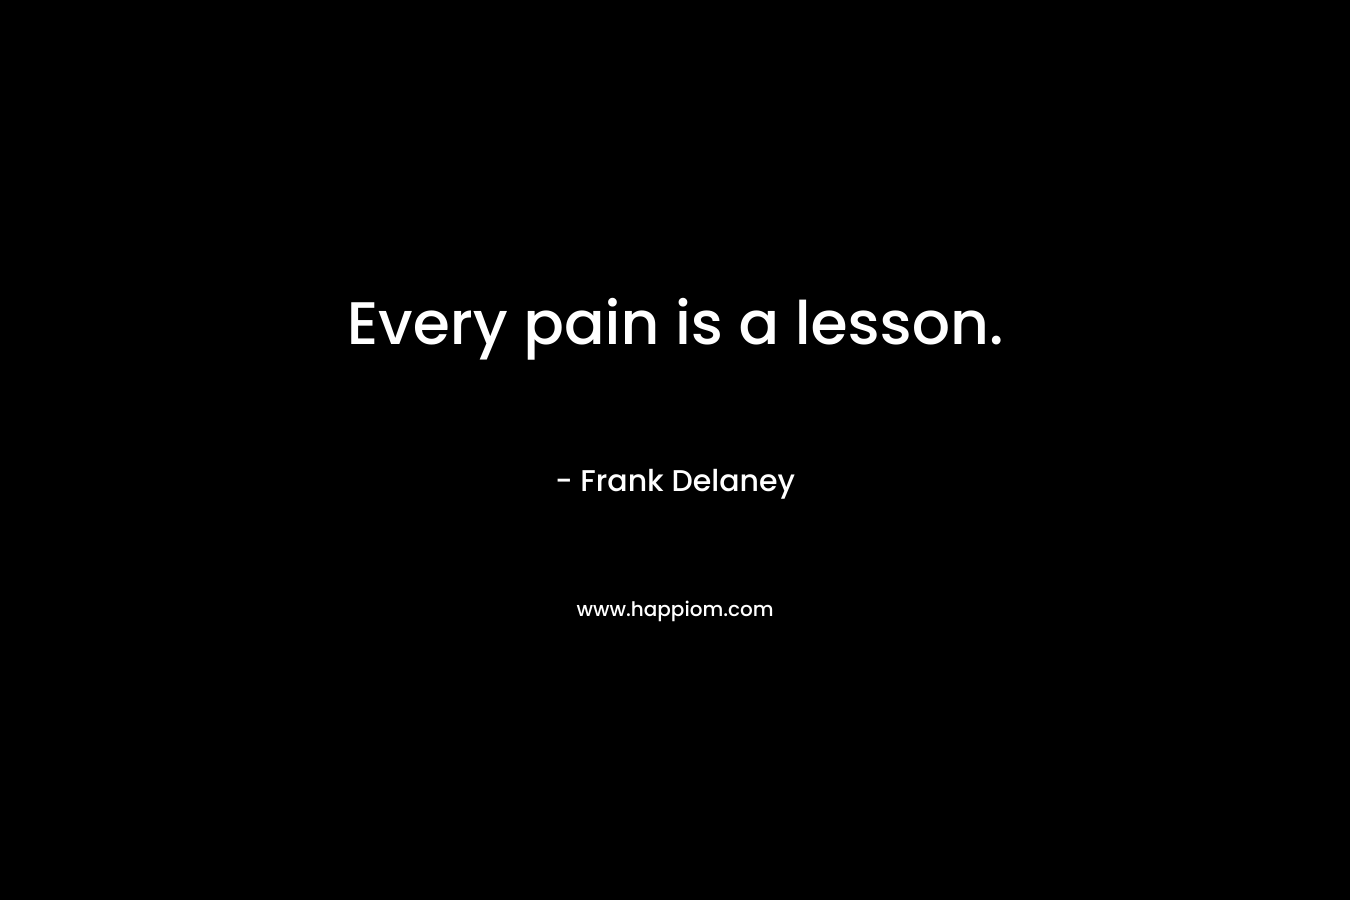 Every pain is a lesson.